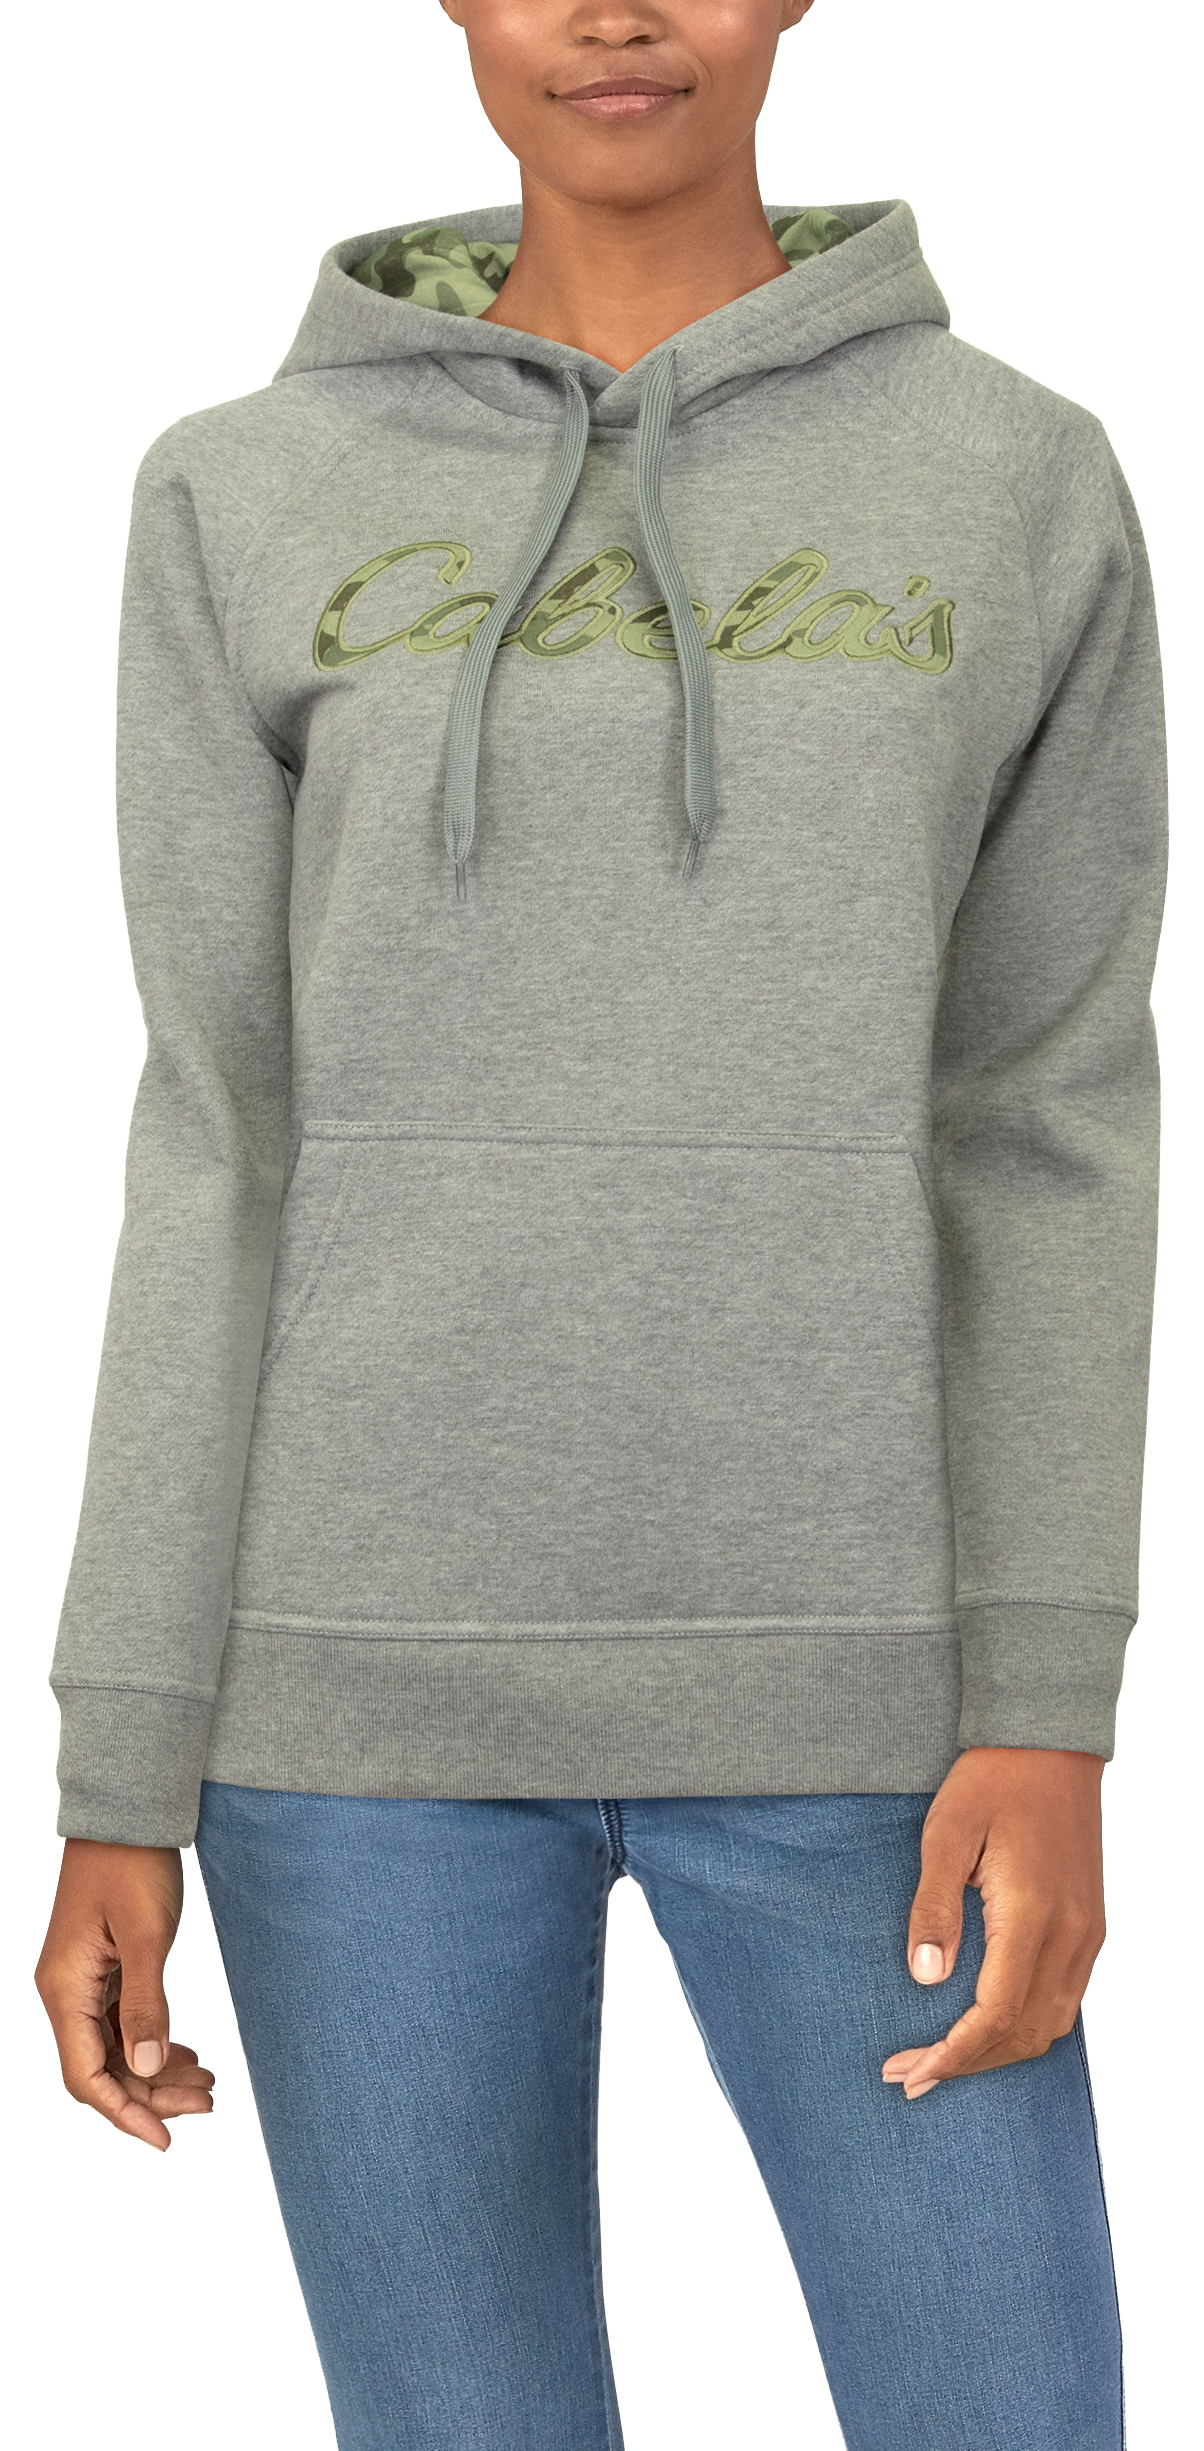 Cabela's GameDay Camo Lettering Long-Sleeve Hoodie for Ladies